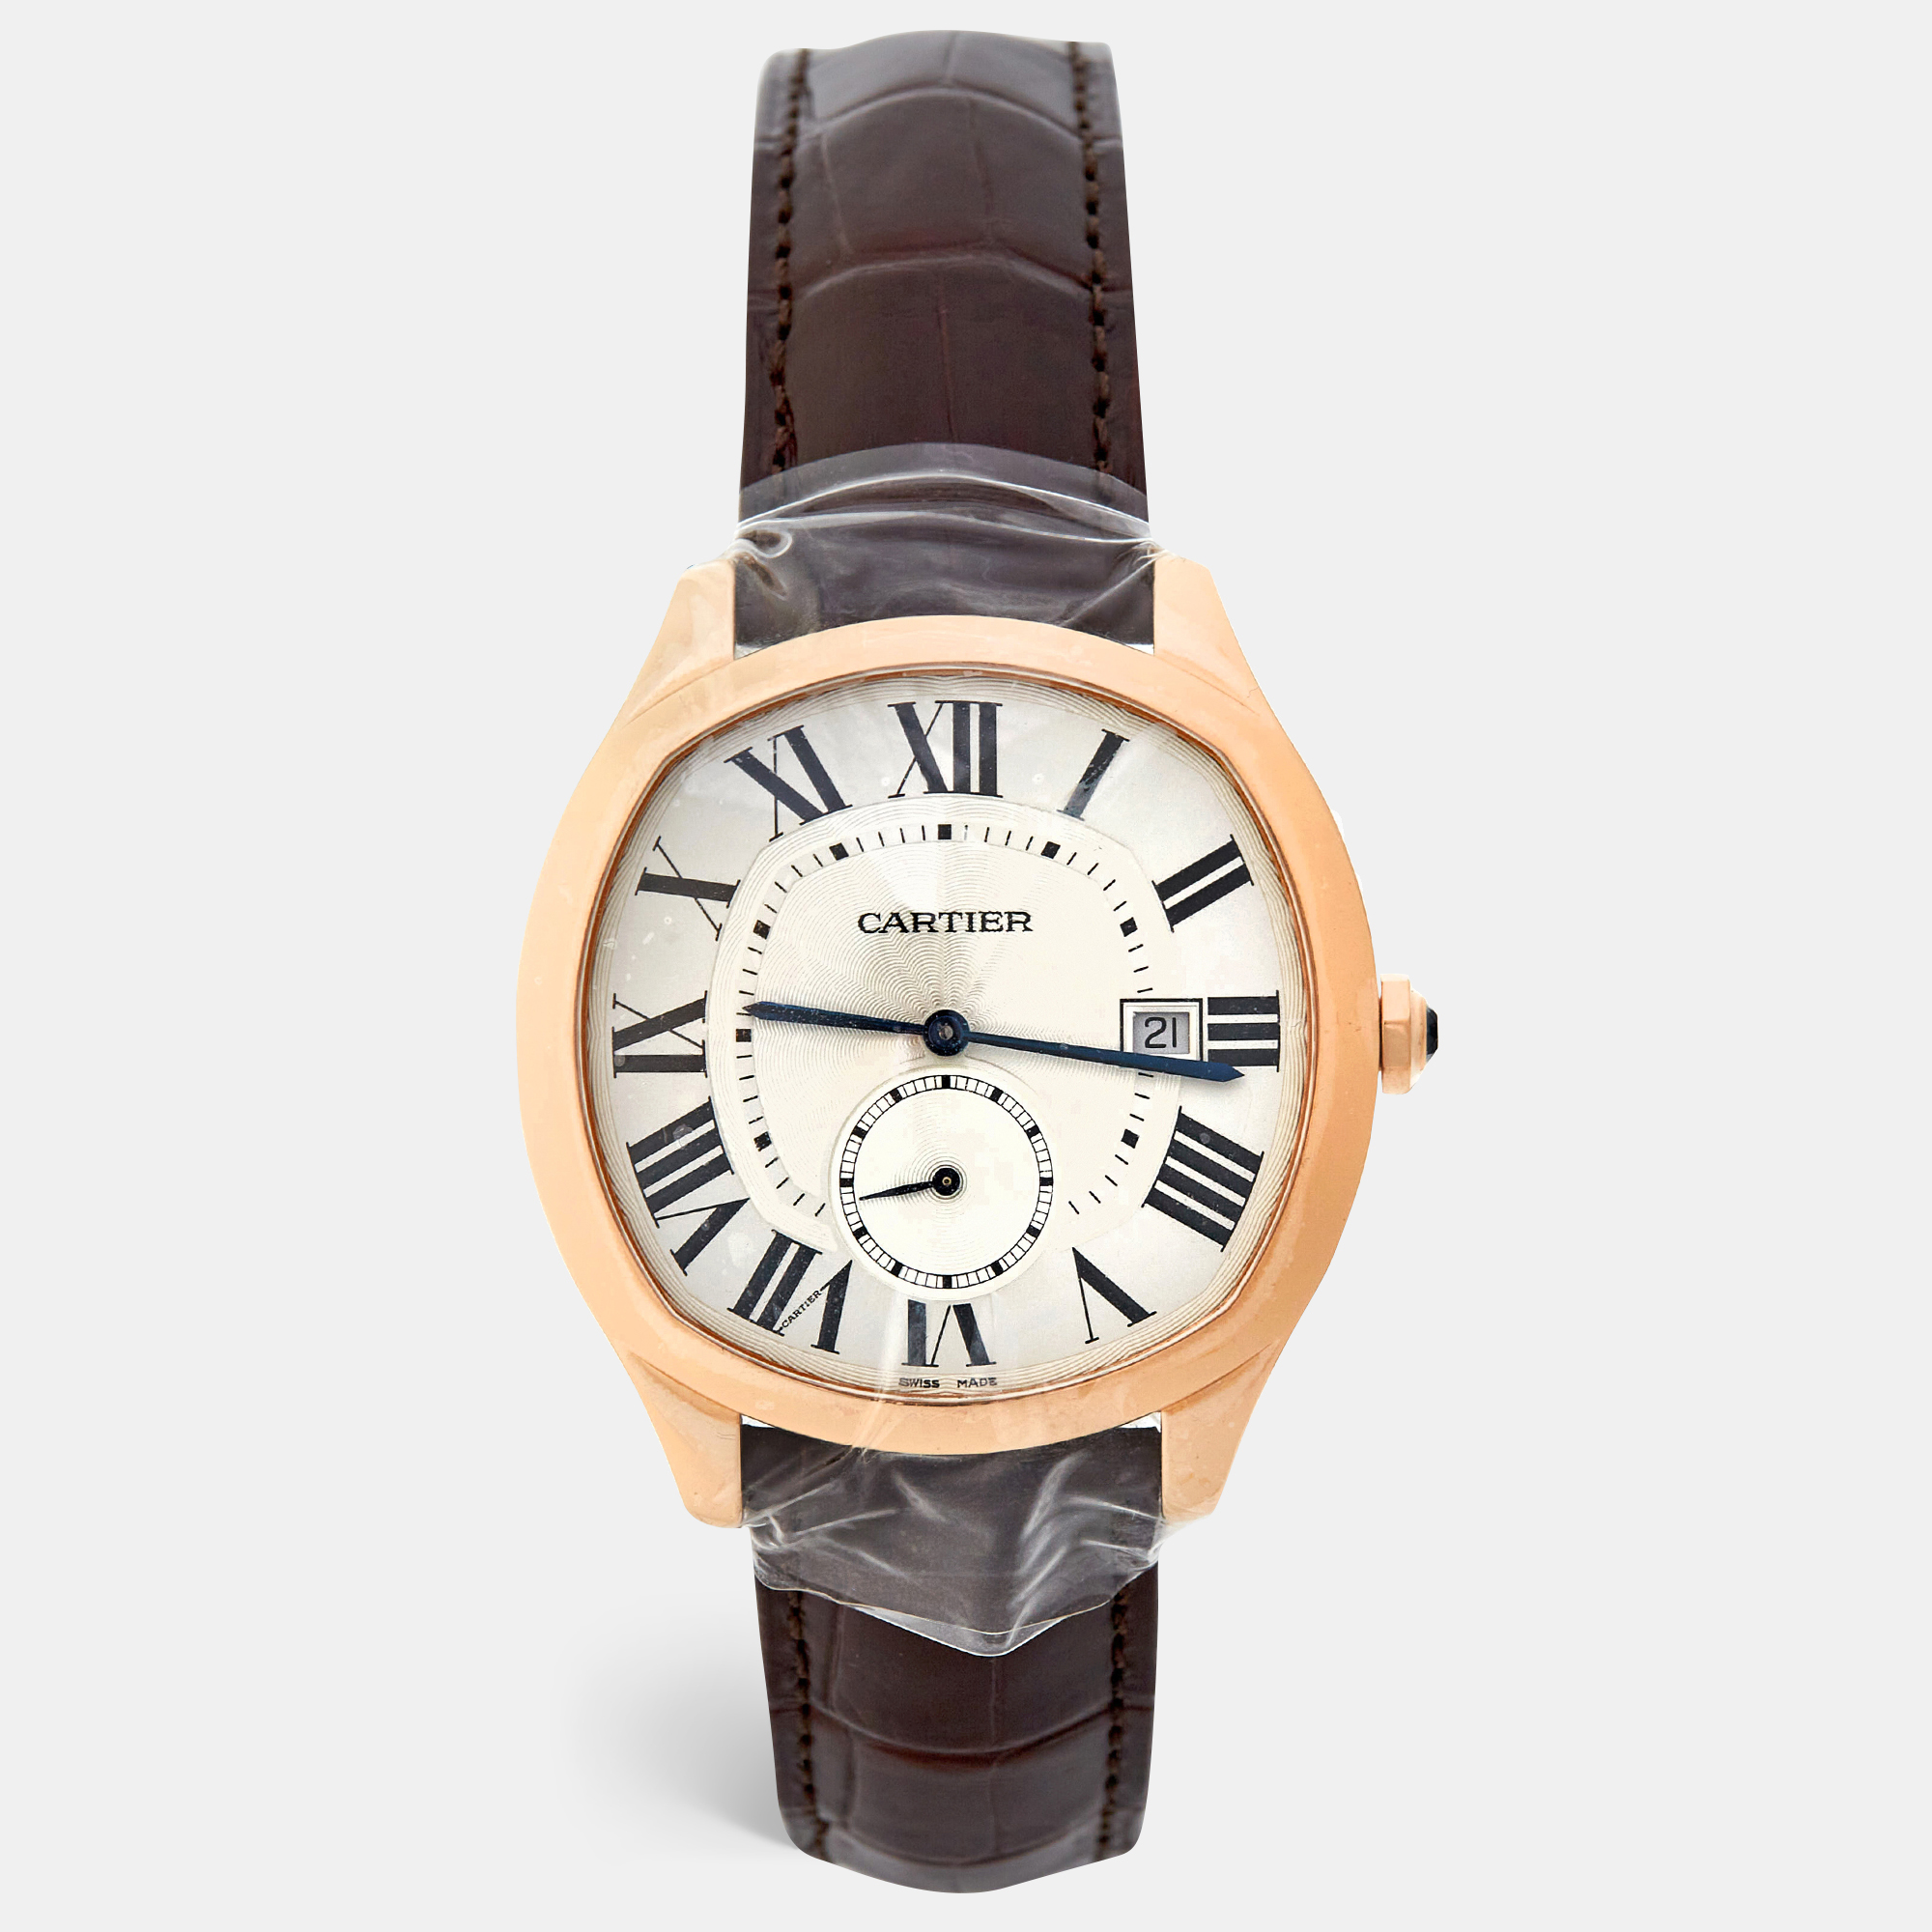 This watch is valuable not only for its appeal but also for the way it has been painstakingly designed and assembled. Swiss made and exuding classy style this automatic watch by Cartier has been created with nothing less than excellence. It has a case made from 18K rose gold held by leather straps. Invest in it today.